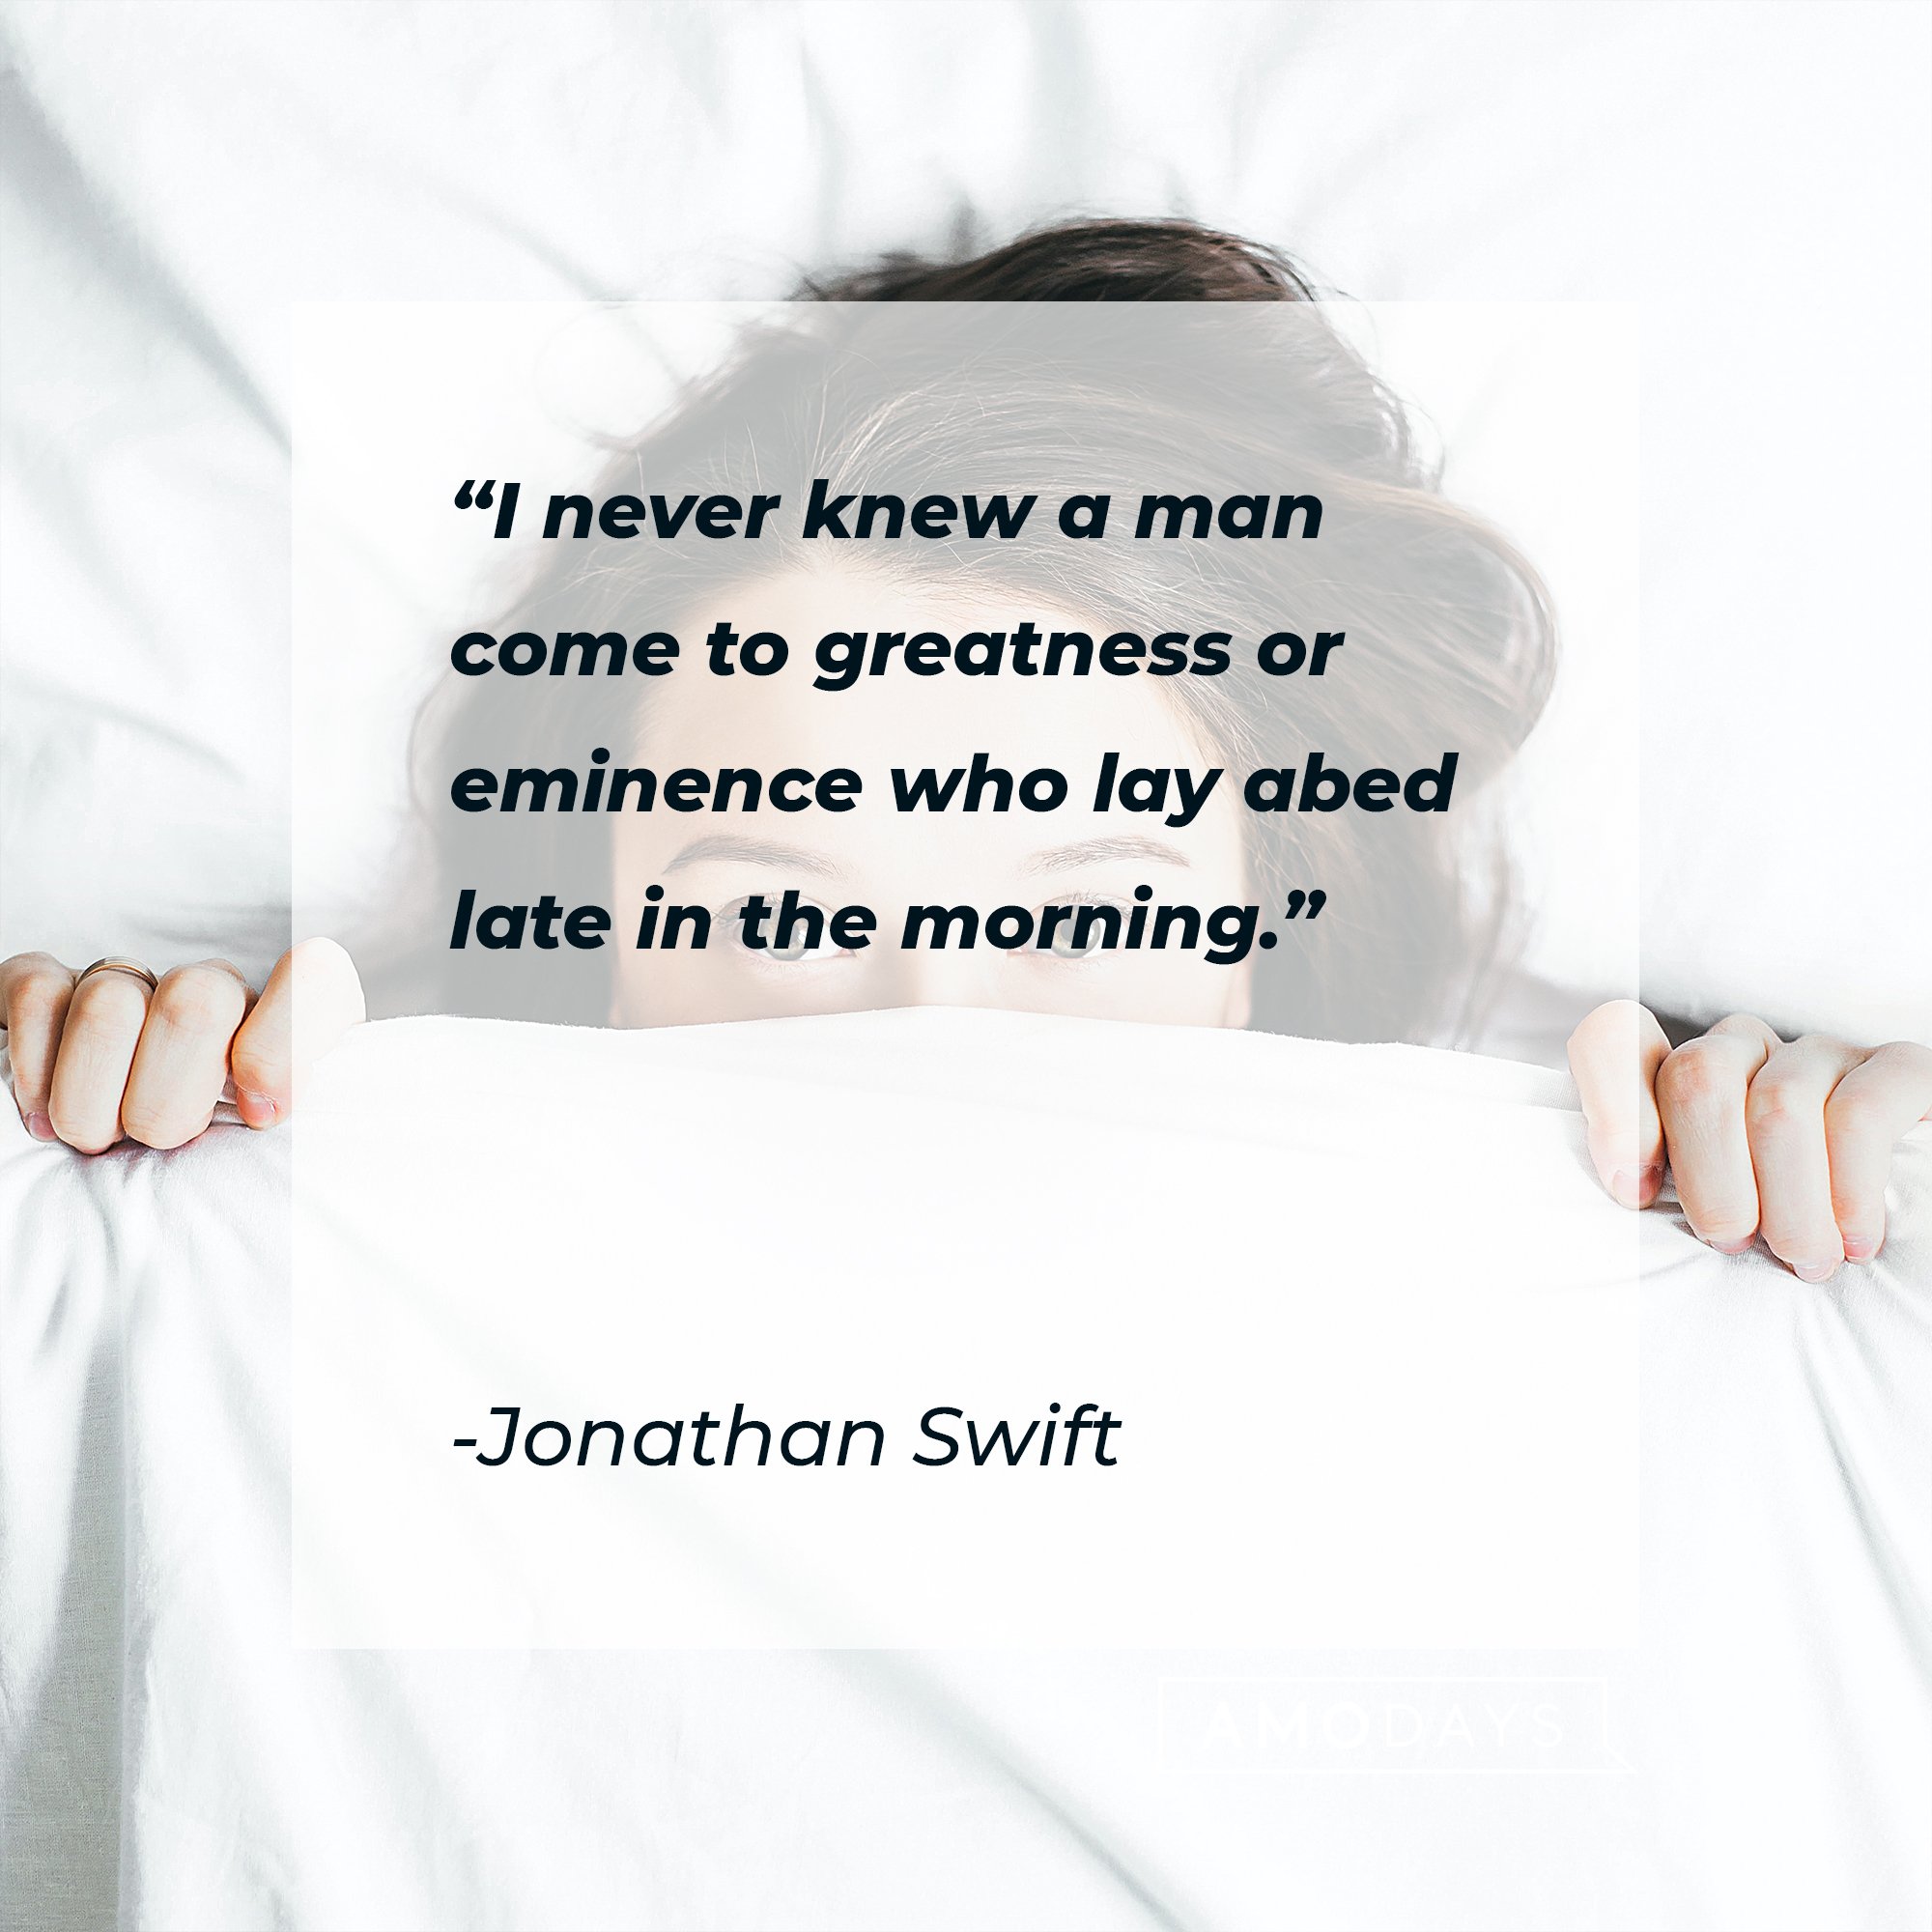  Jonathan Swift’s quote: "I never knew a man come to greatness or eminence who lay abed late in the morning." | Image: AmoDays 